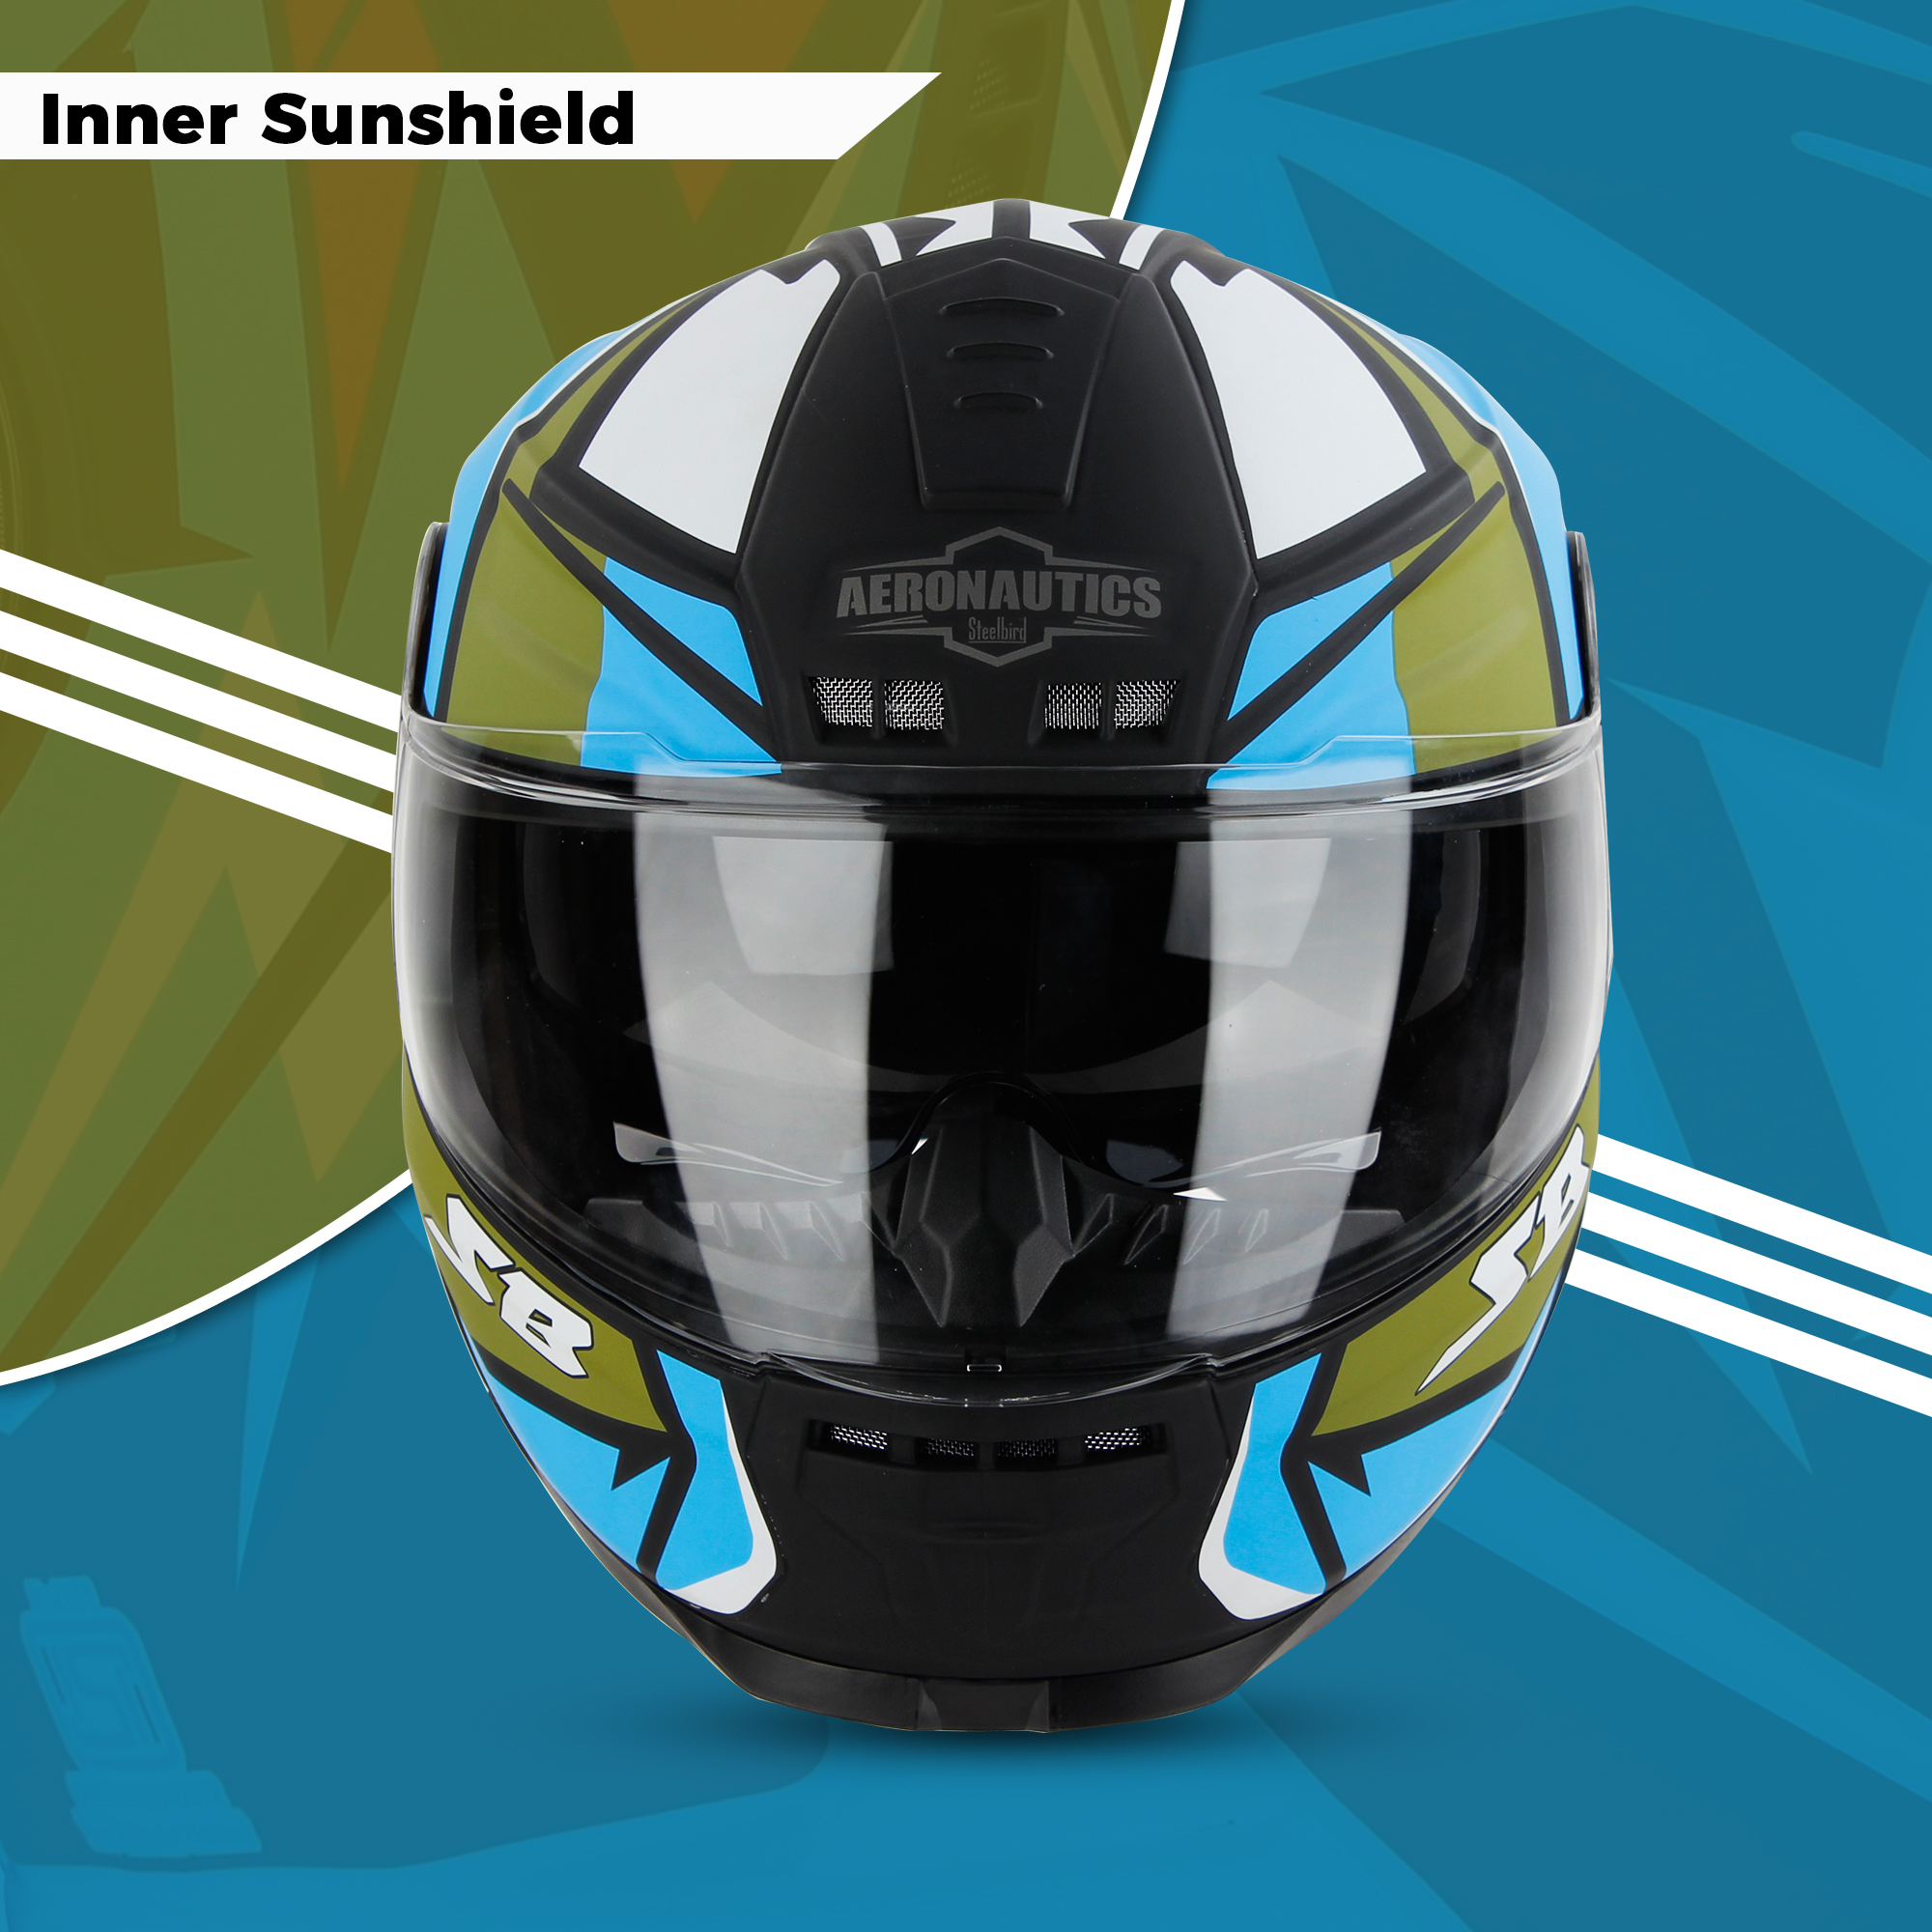 Steelbird SBH-40 Decode ISI Certified Full Face Graphic Helmet For Men And Women With Inner Sun Shield (Glossy Black Battle Green)